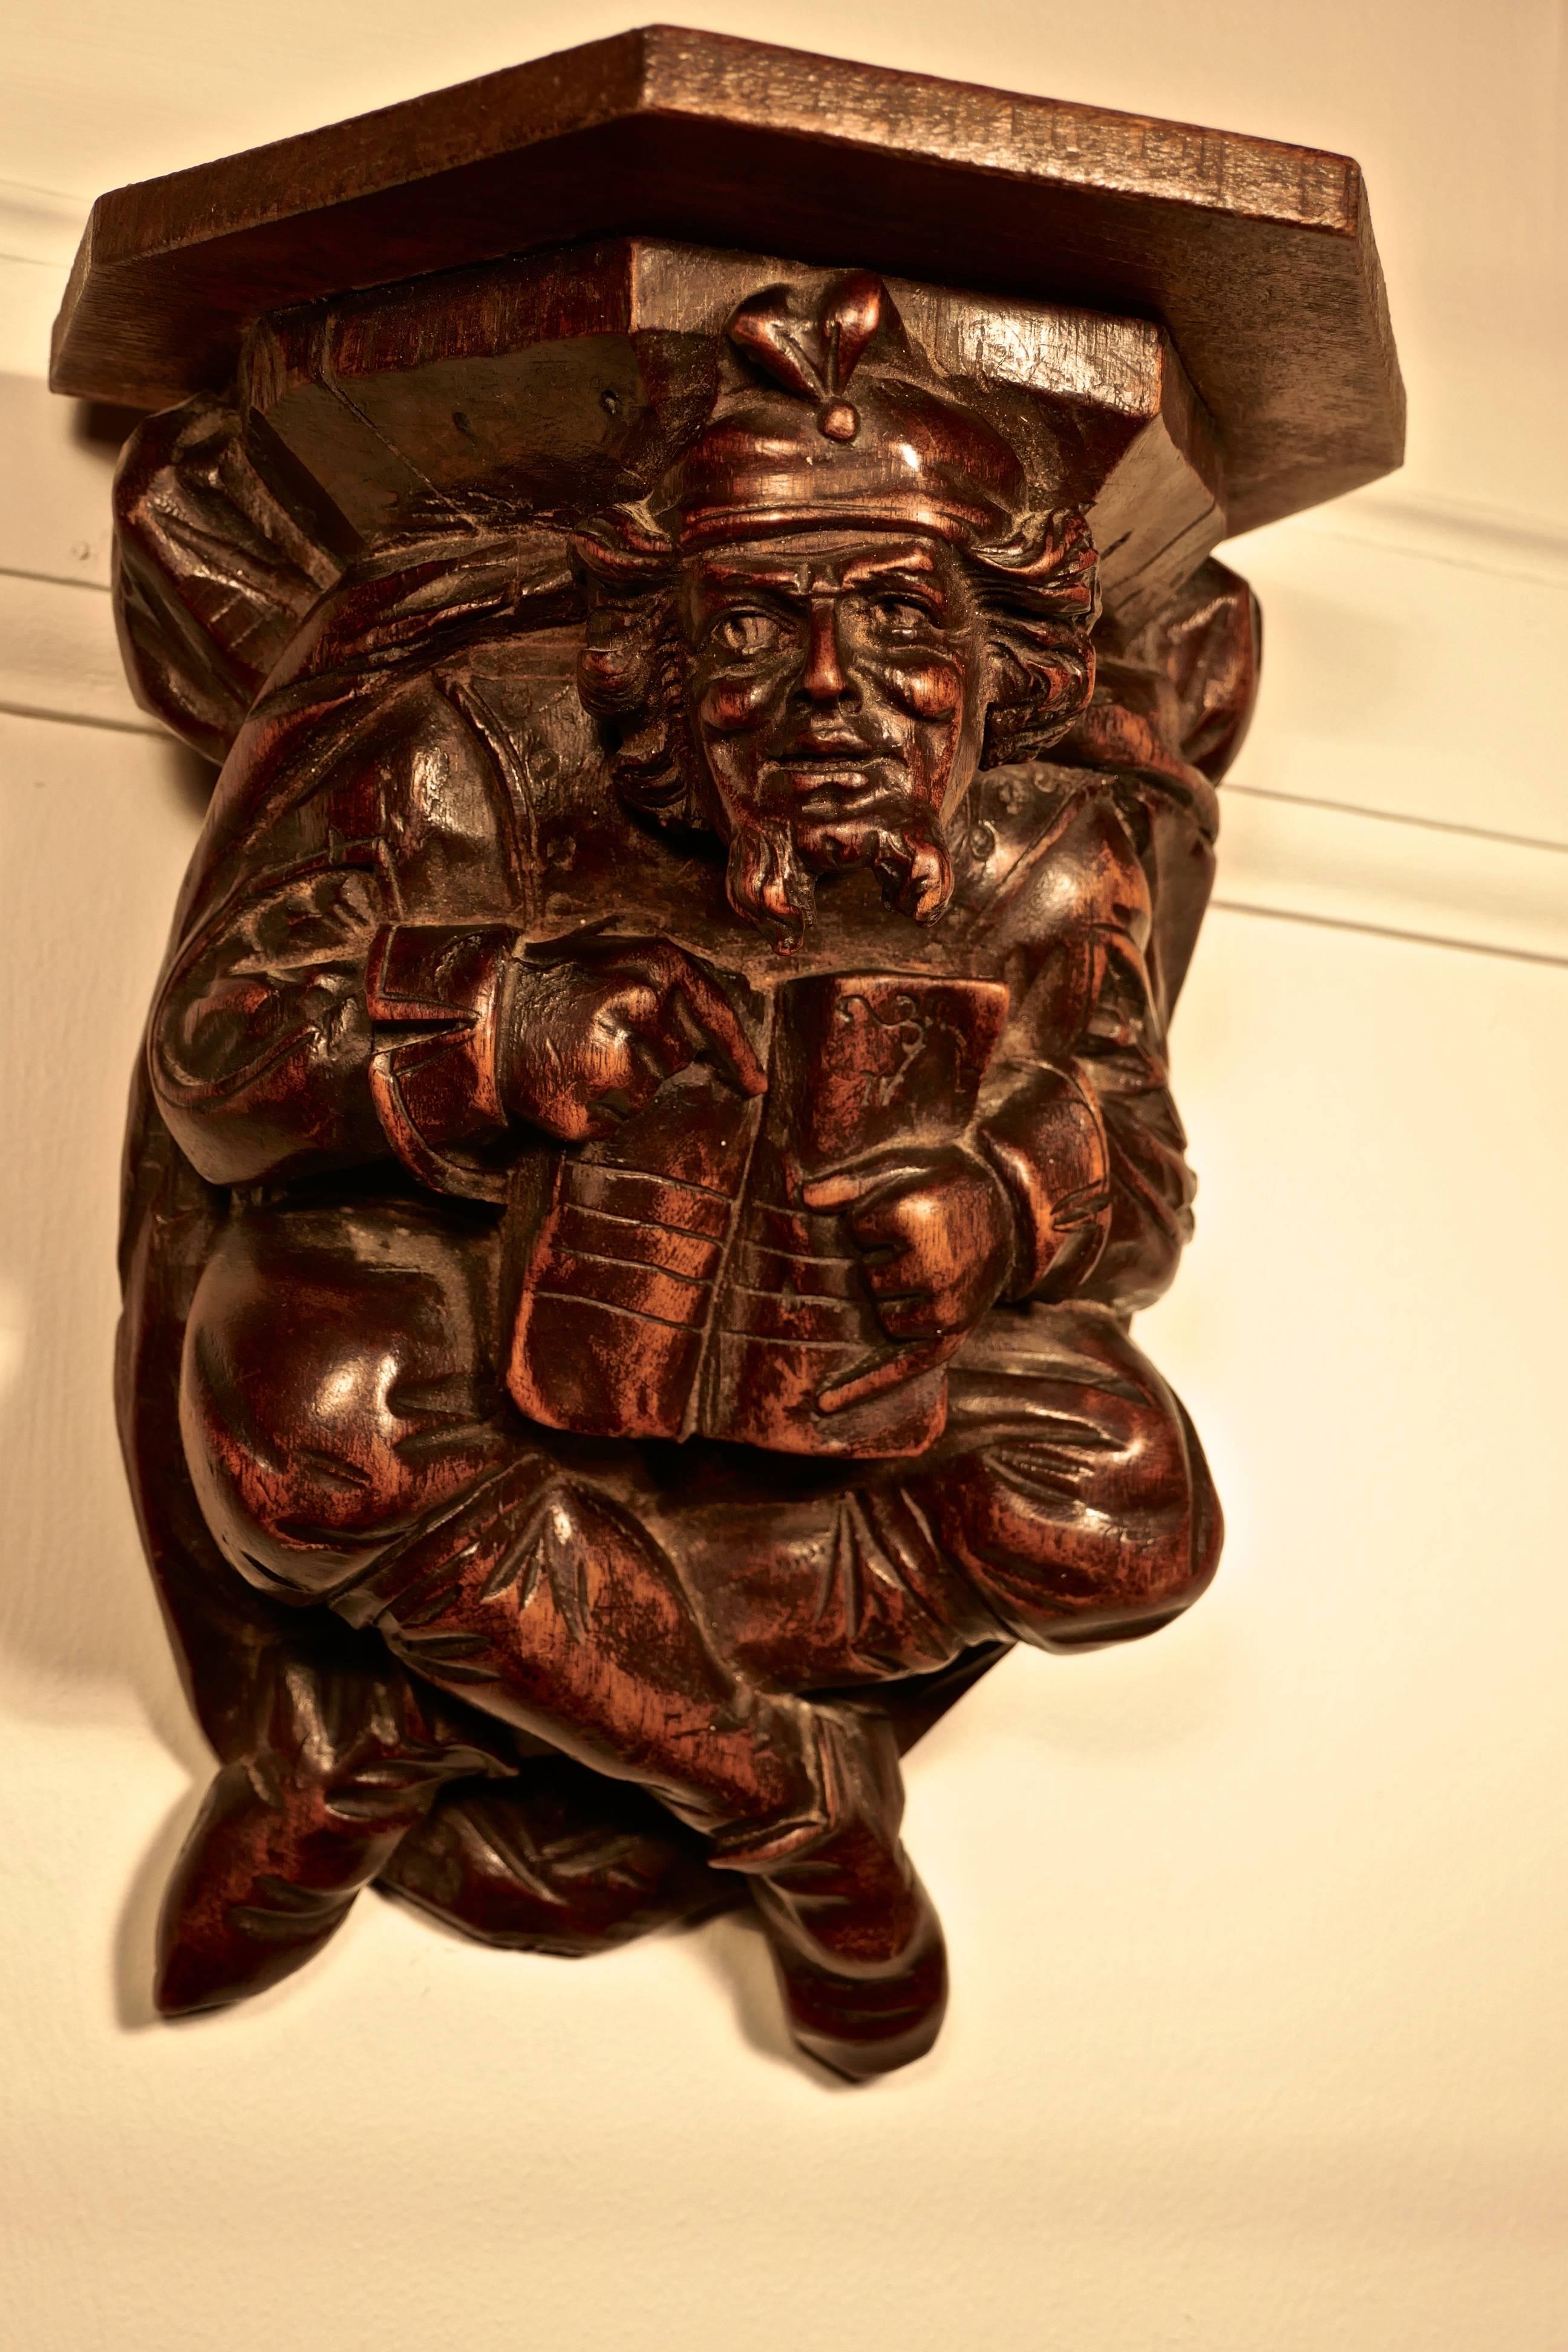 A 19th century carved walnut wall bracket, Medieval magician

This is a beautifully carved piece, depicting a Medieval magician reading from his book of spells, he hangs crossed legged and has a piercing expression in his eyes

The bracket had a